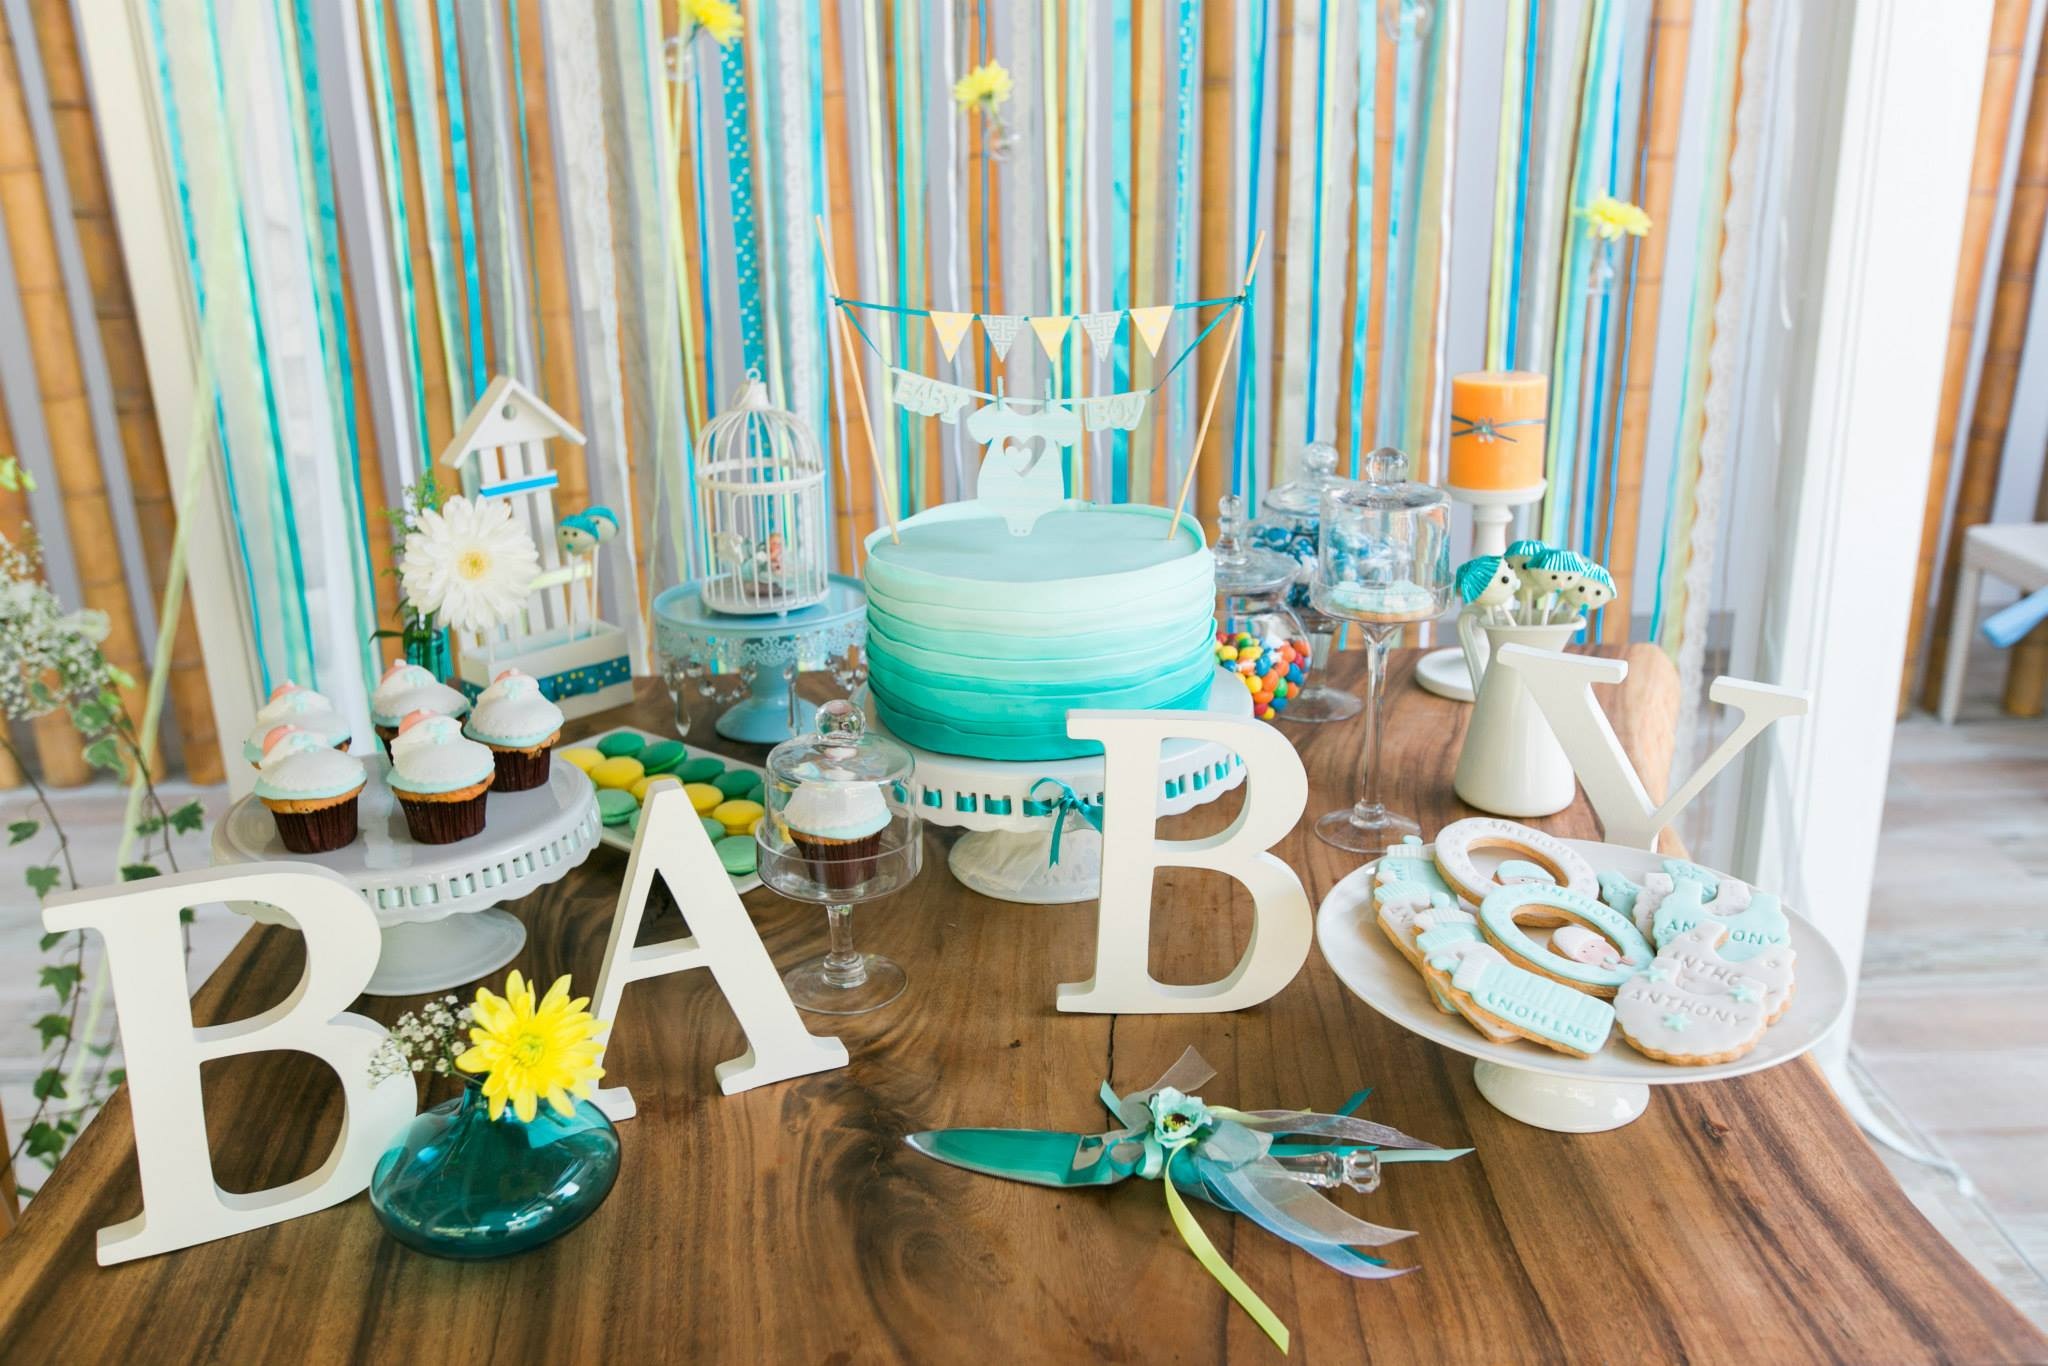 Baby Boy Baby Shower Decor
 turquoise gorgeous baby boy shower main table decorations